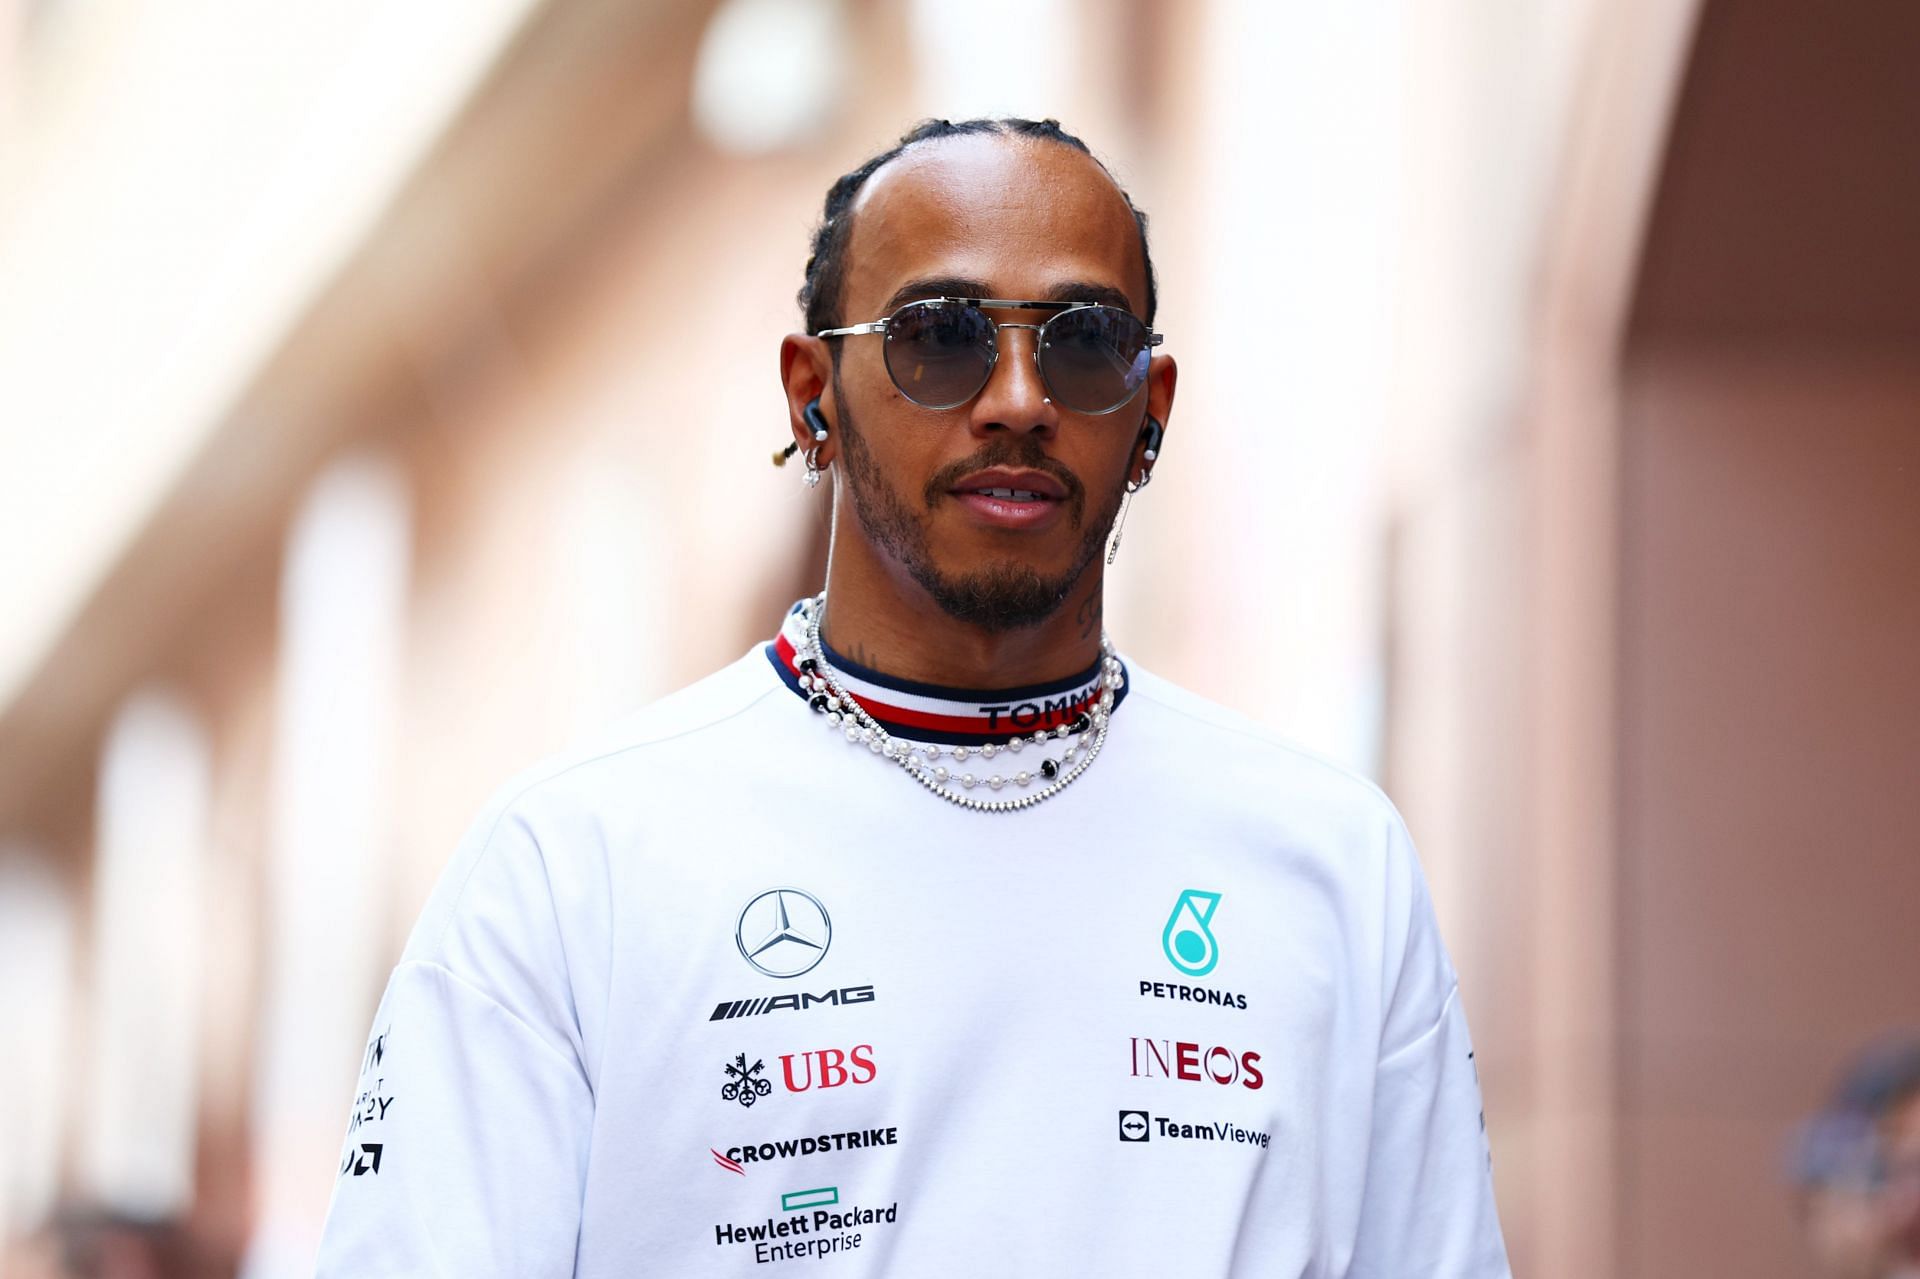 Lewis Hamilton hopes he does not have to counter the bouncing anymore